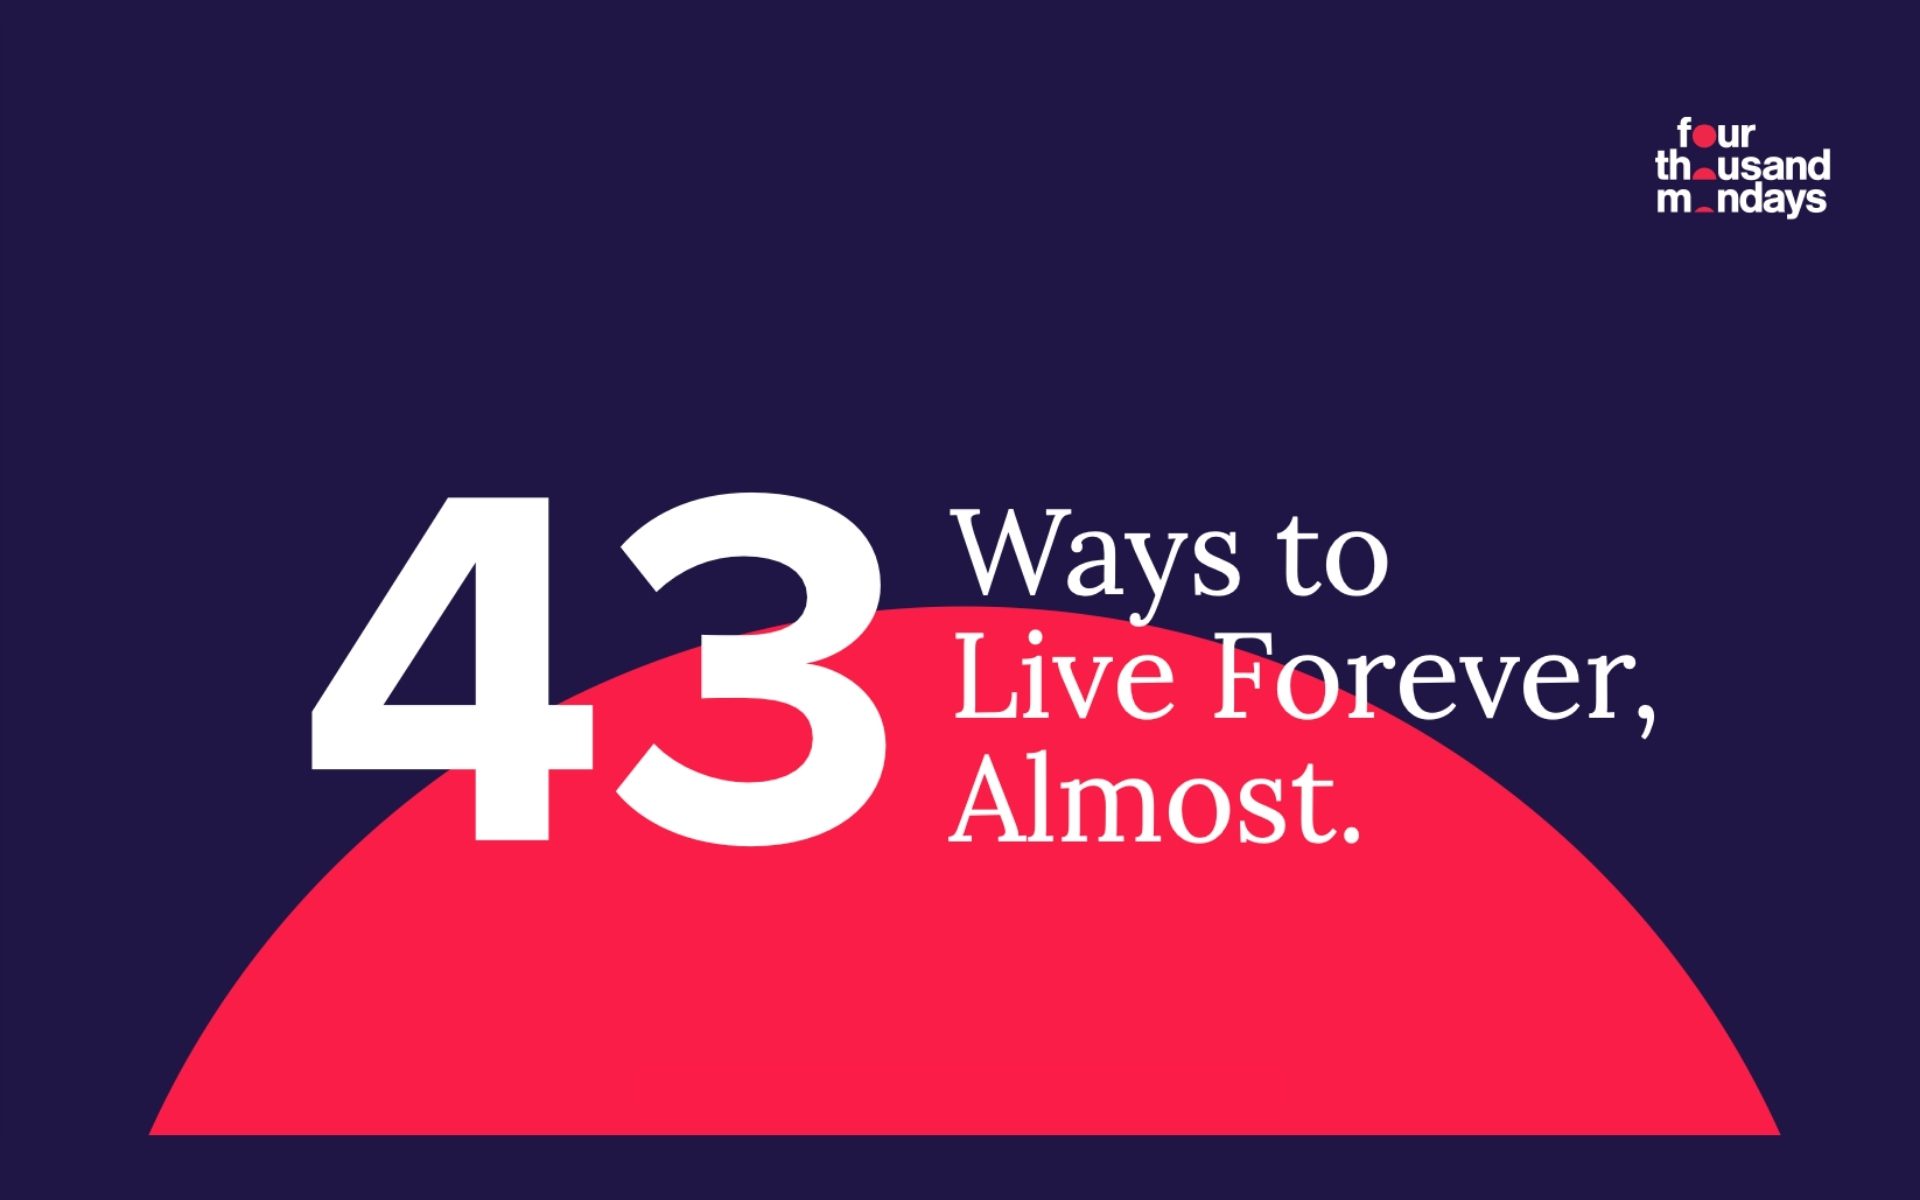 43 Ways to Live Forever, Almost